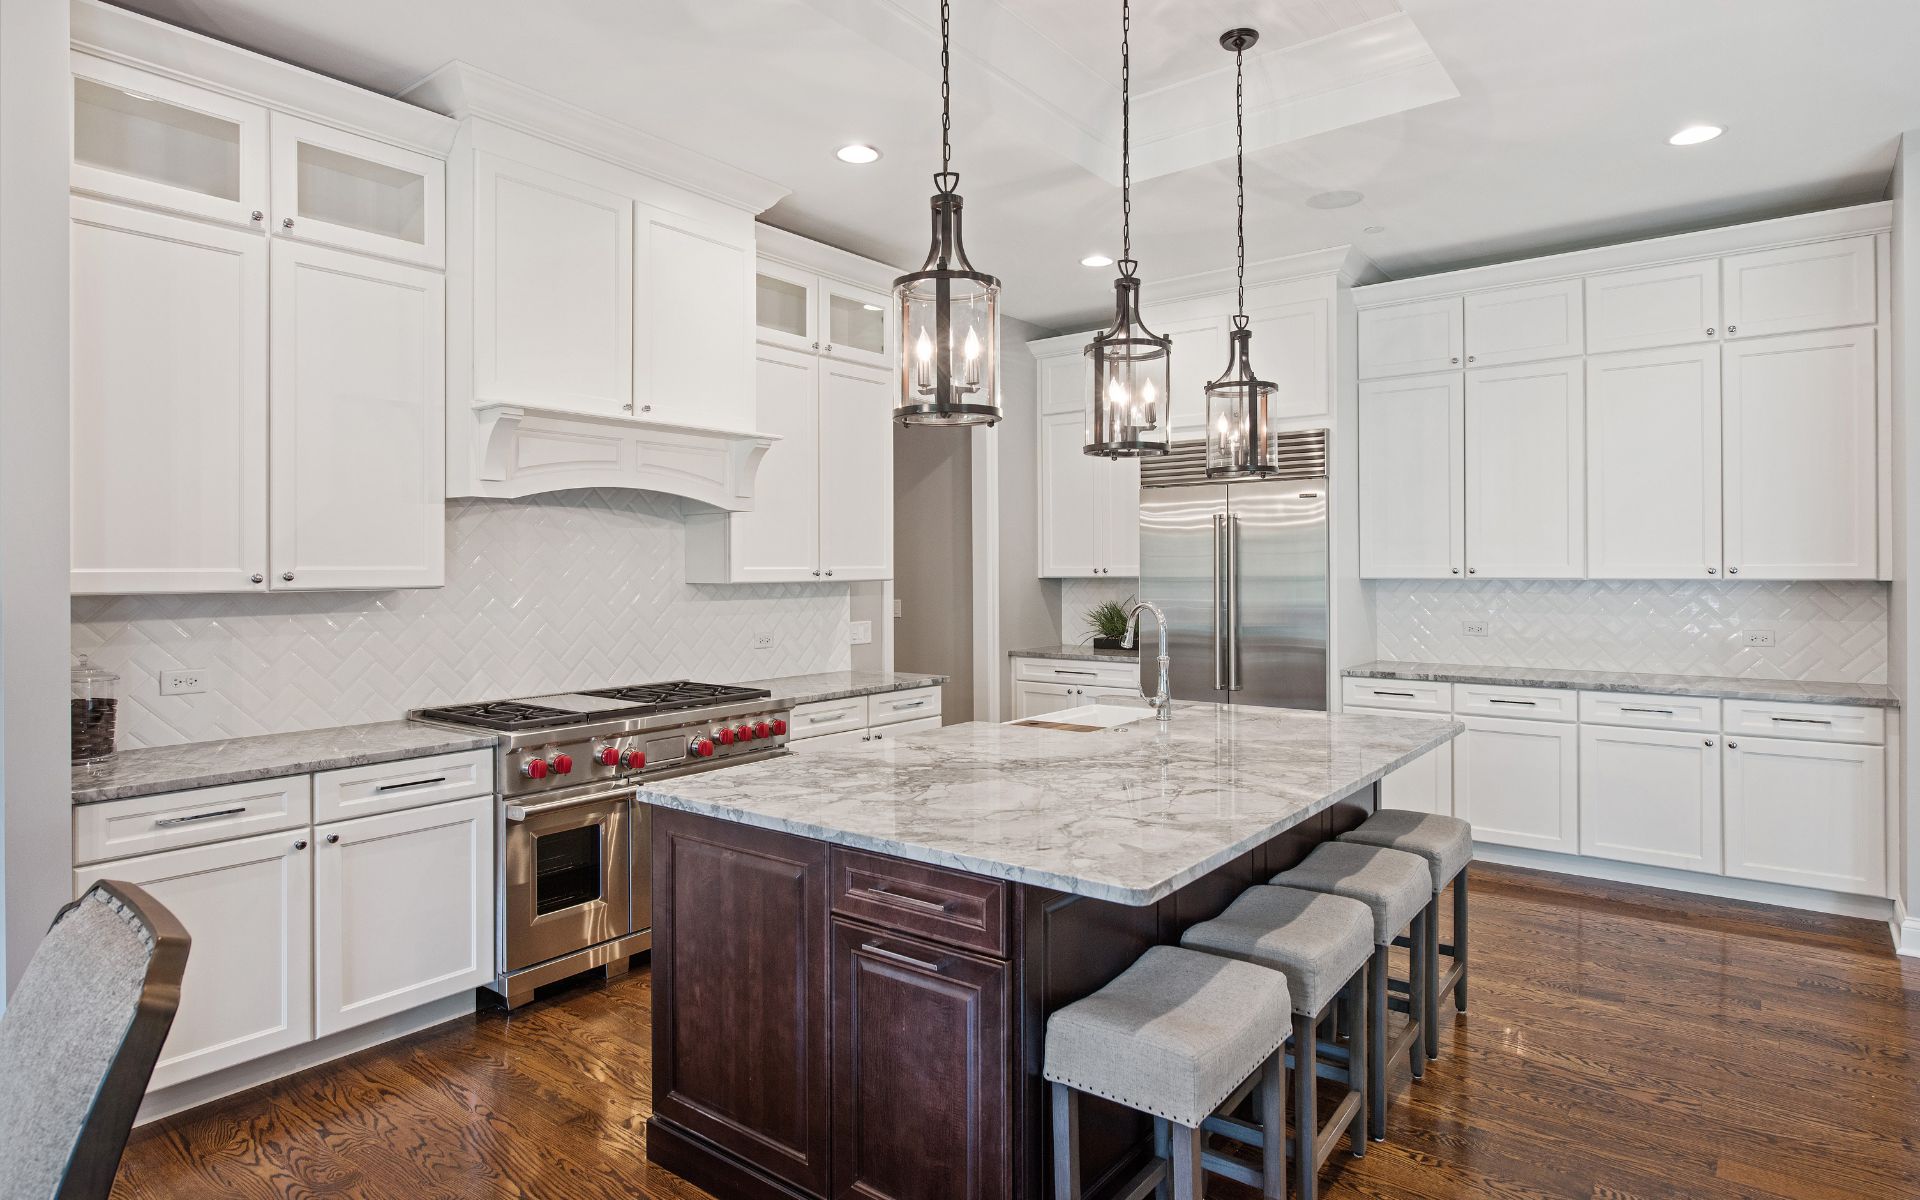 Kitchen Island VS Peninsula: How to Choose What's Best for Your Layout & Budget